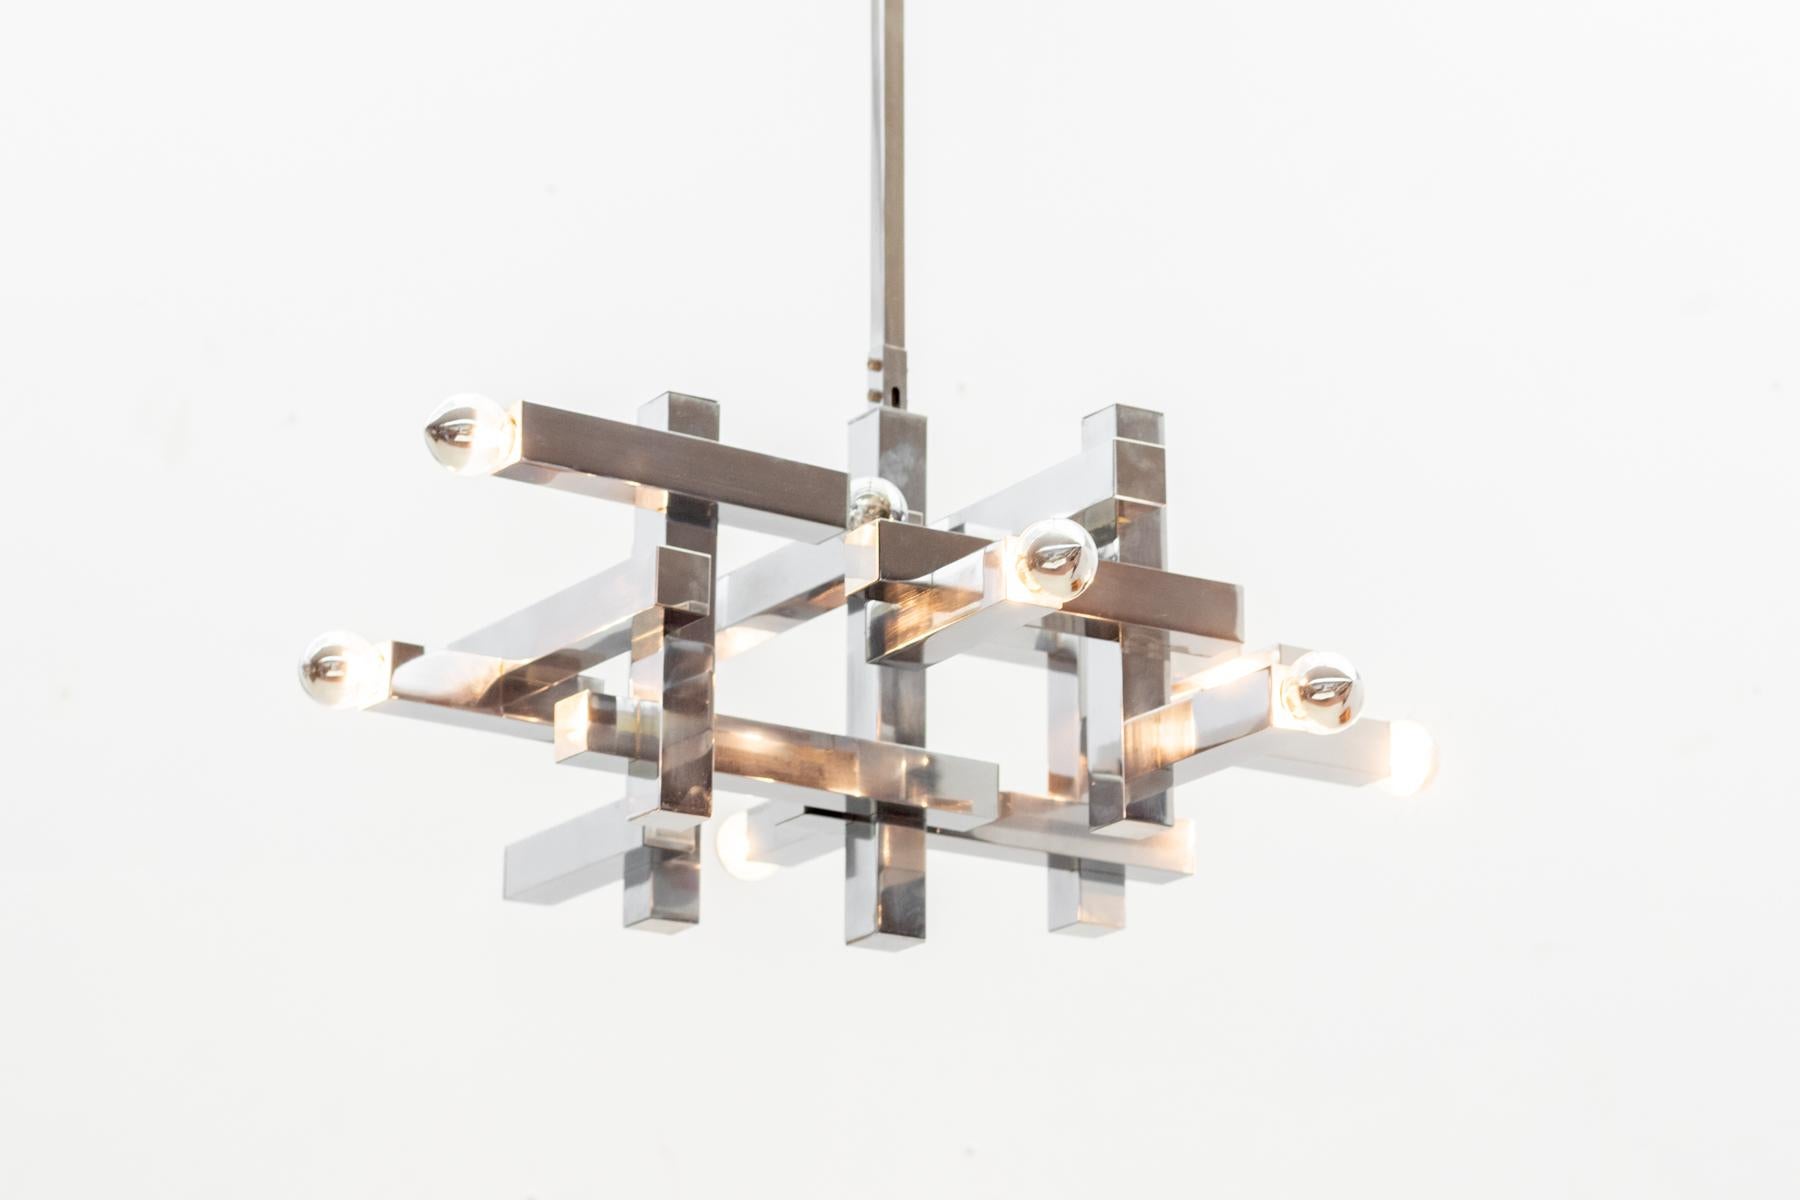 Gaetano Sciolari's Metric chandelier is characterized by its clean lines and geometric precision. The luminaire features a structured frame in polished chrome, creating a harmonious interplay of straight and angular elements.

Adjustable height on